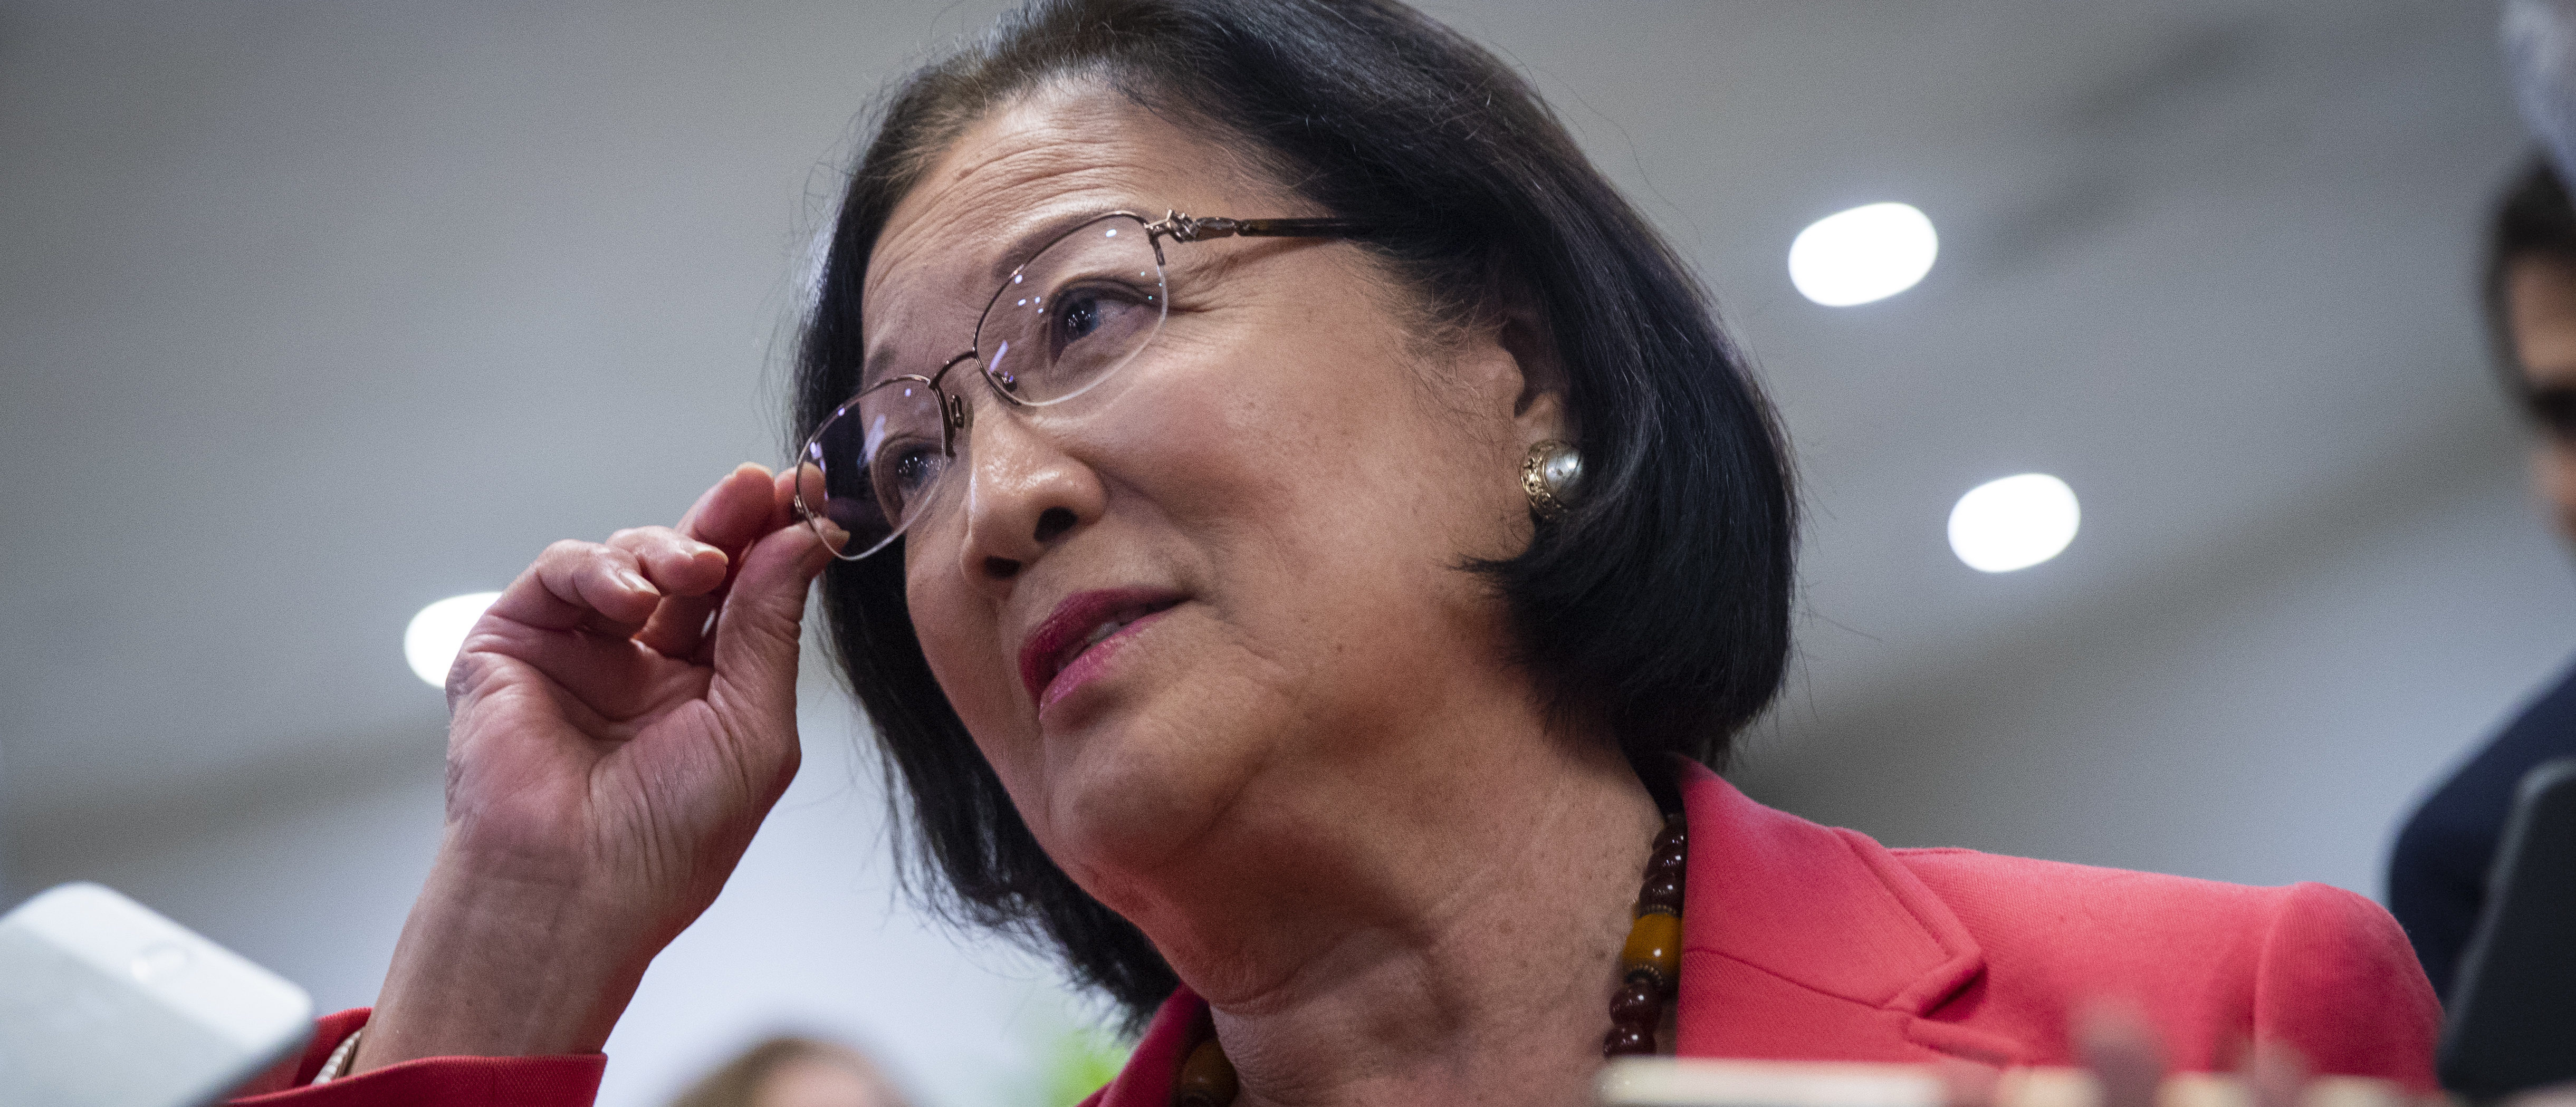 WASHINGTON, DC - SEPTEMBER 24: Sen. Mazie Hirono (D-HI) speaks to reporters on her way to a vote on Capitol Hill, September 24, 2018 in Washington, DC. Christine Blasey Ford, who has accused Kavanaugh of sexual assault, has agreed to testify before the Senate Judiciary Committee on Thursday. (Photo by Drew Angerer/Getty Images)